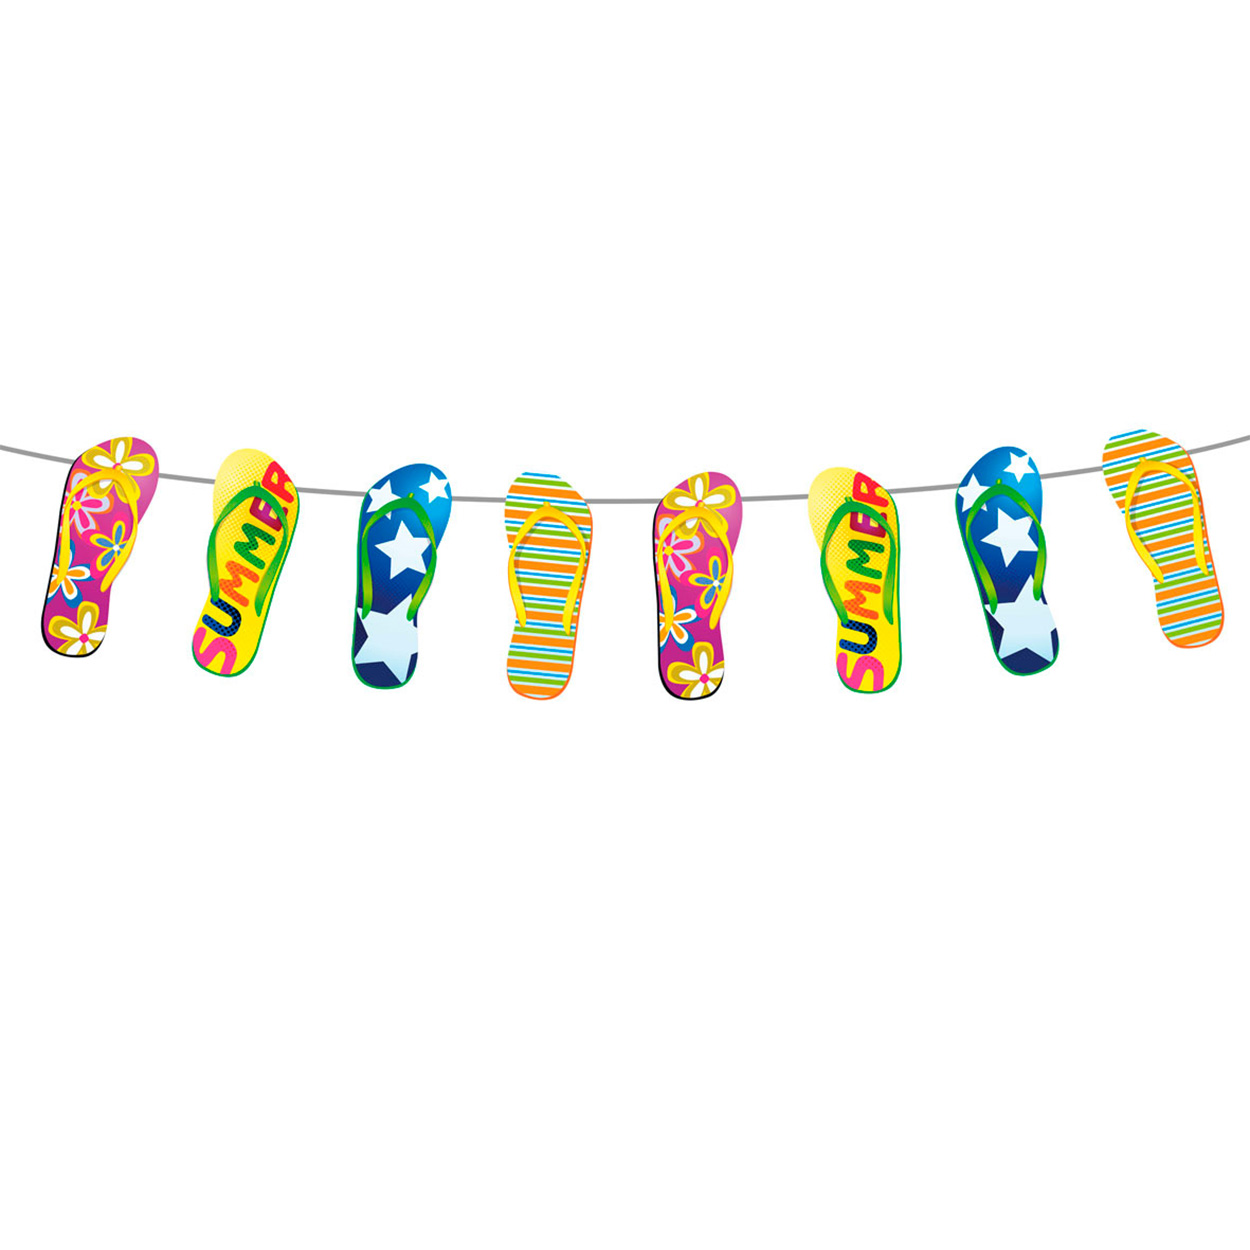 ik ben trots Bermad Wens Summer Party Garland Slippers, 10m. | Thimble Toys